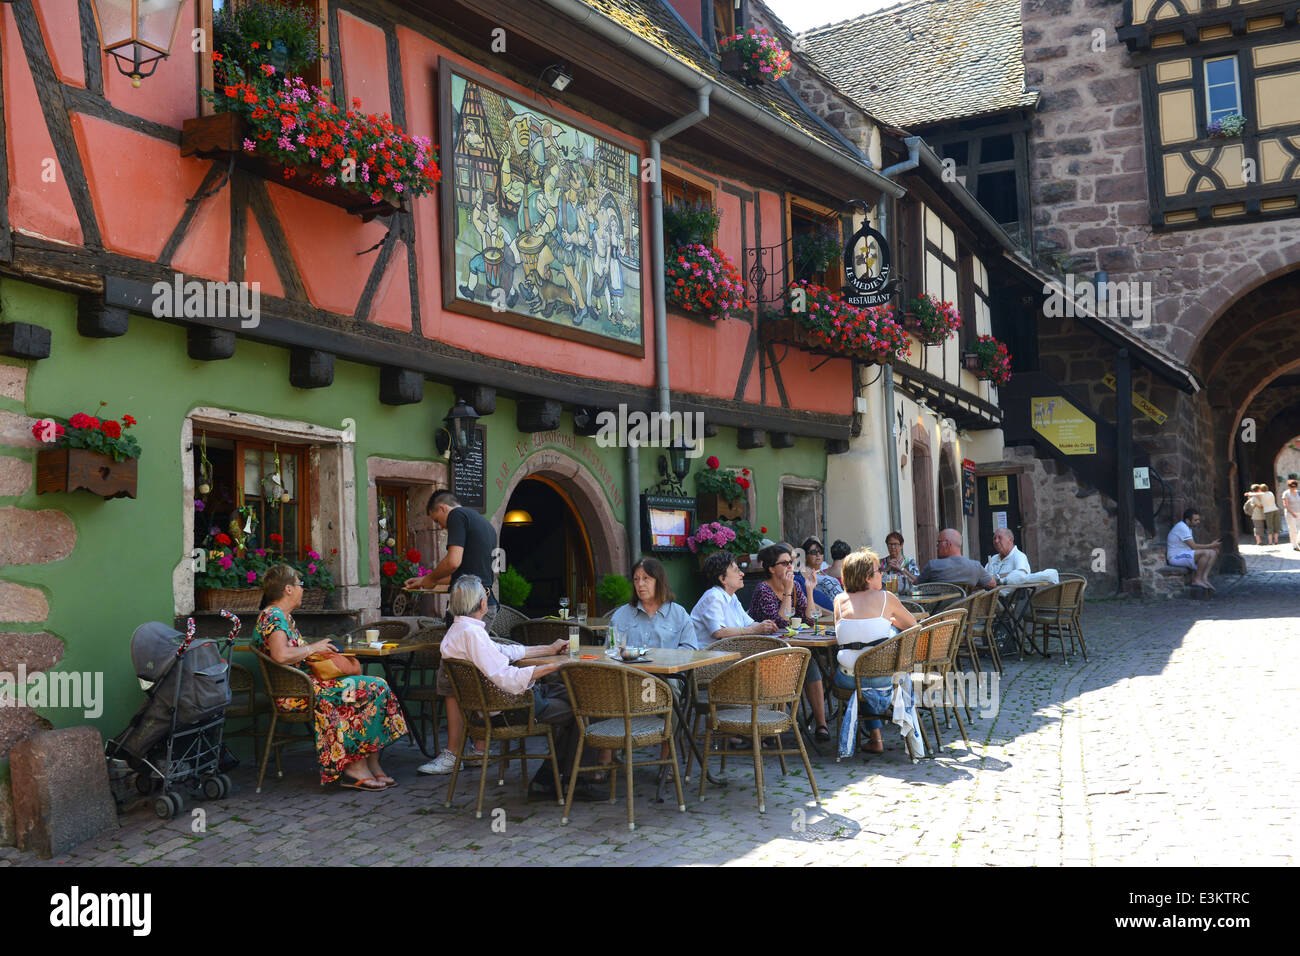 People eating outside The Medieval Restaurant in Riquewihr Alsace region France Stock Photo